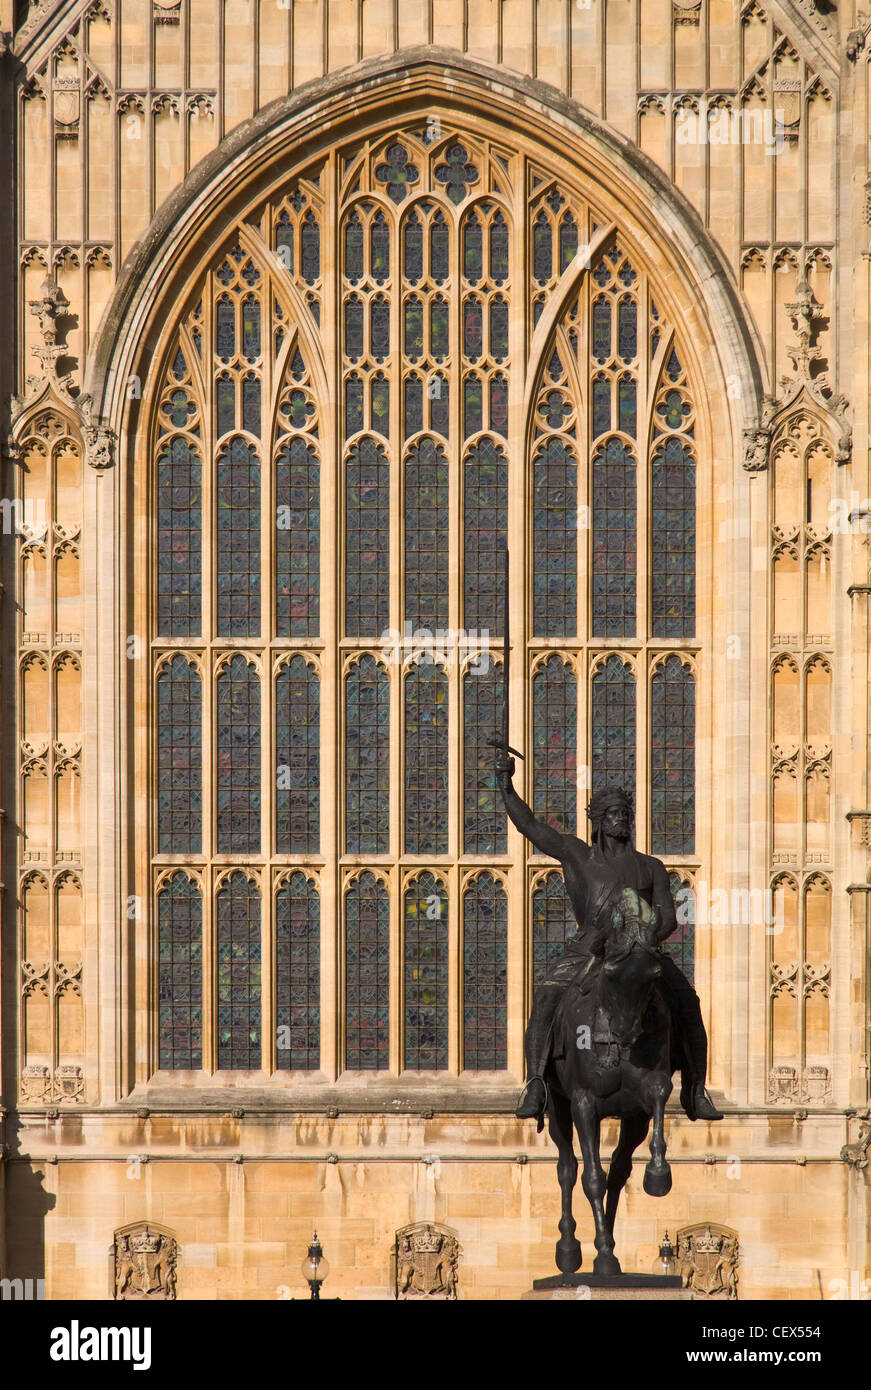 The statue of Richard the Lionheart in front of the Palace of Westminster 3. Stock Photo